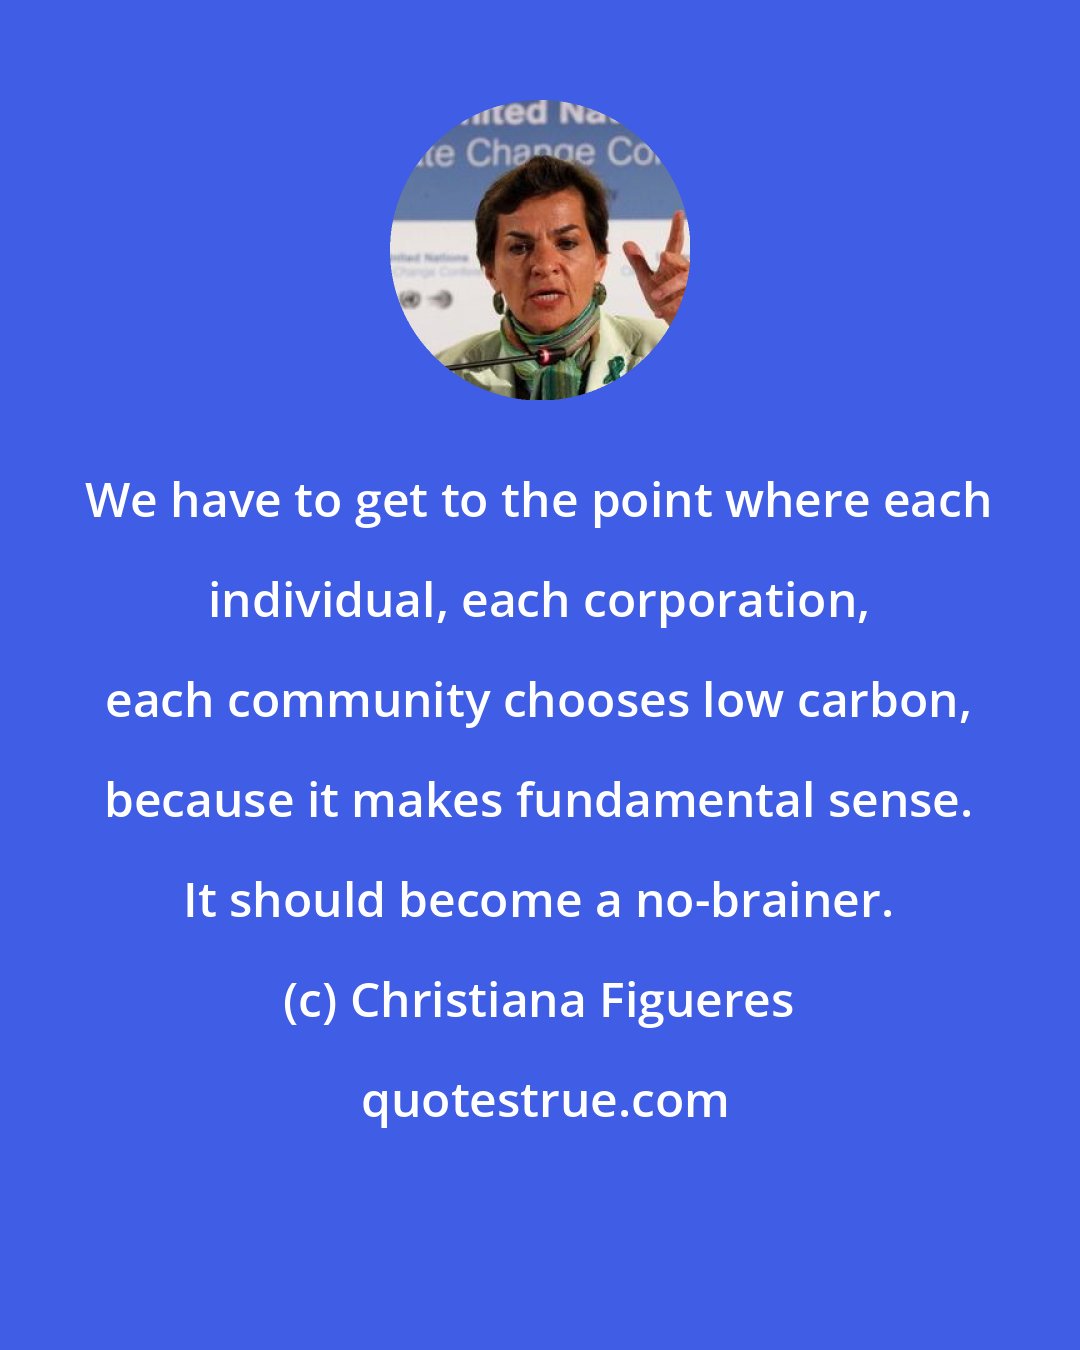 Christiana Figueres: We have to get to the point where each individual, each corporation, each community chooses low carbon, because it makes fundamental sense. It should become a no-brainer.